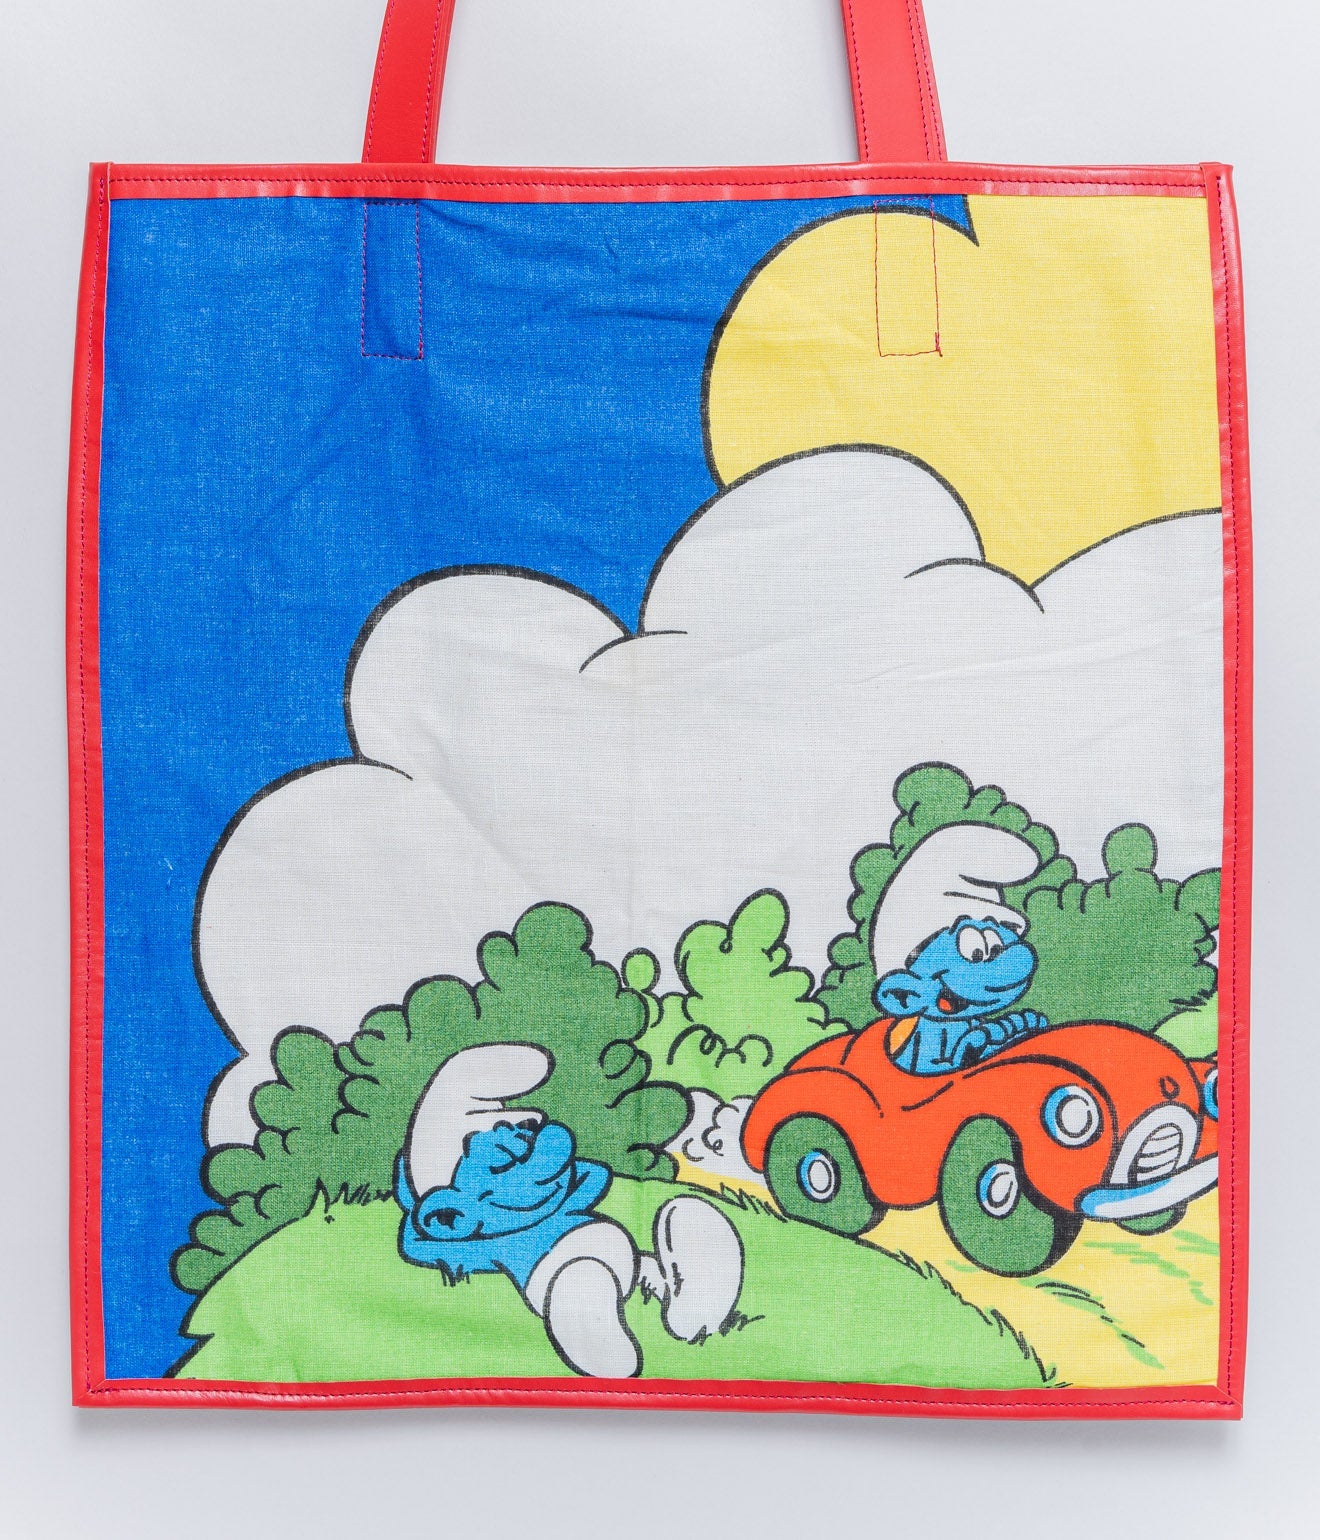 WEAREALLANIMALS UPCYCLE ”Piping Flat Tote -Vintage Smurf Fabric-" #8 - WEAREALLANIMALS